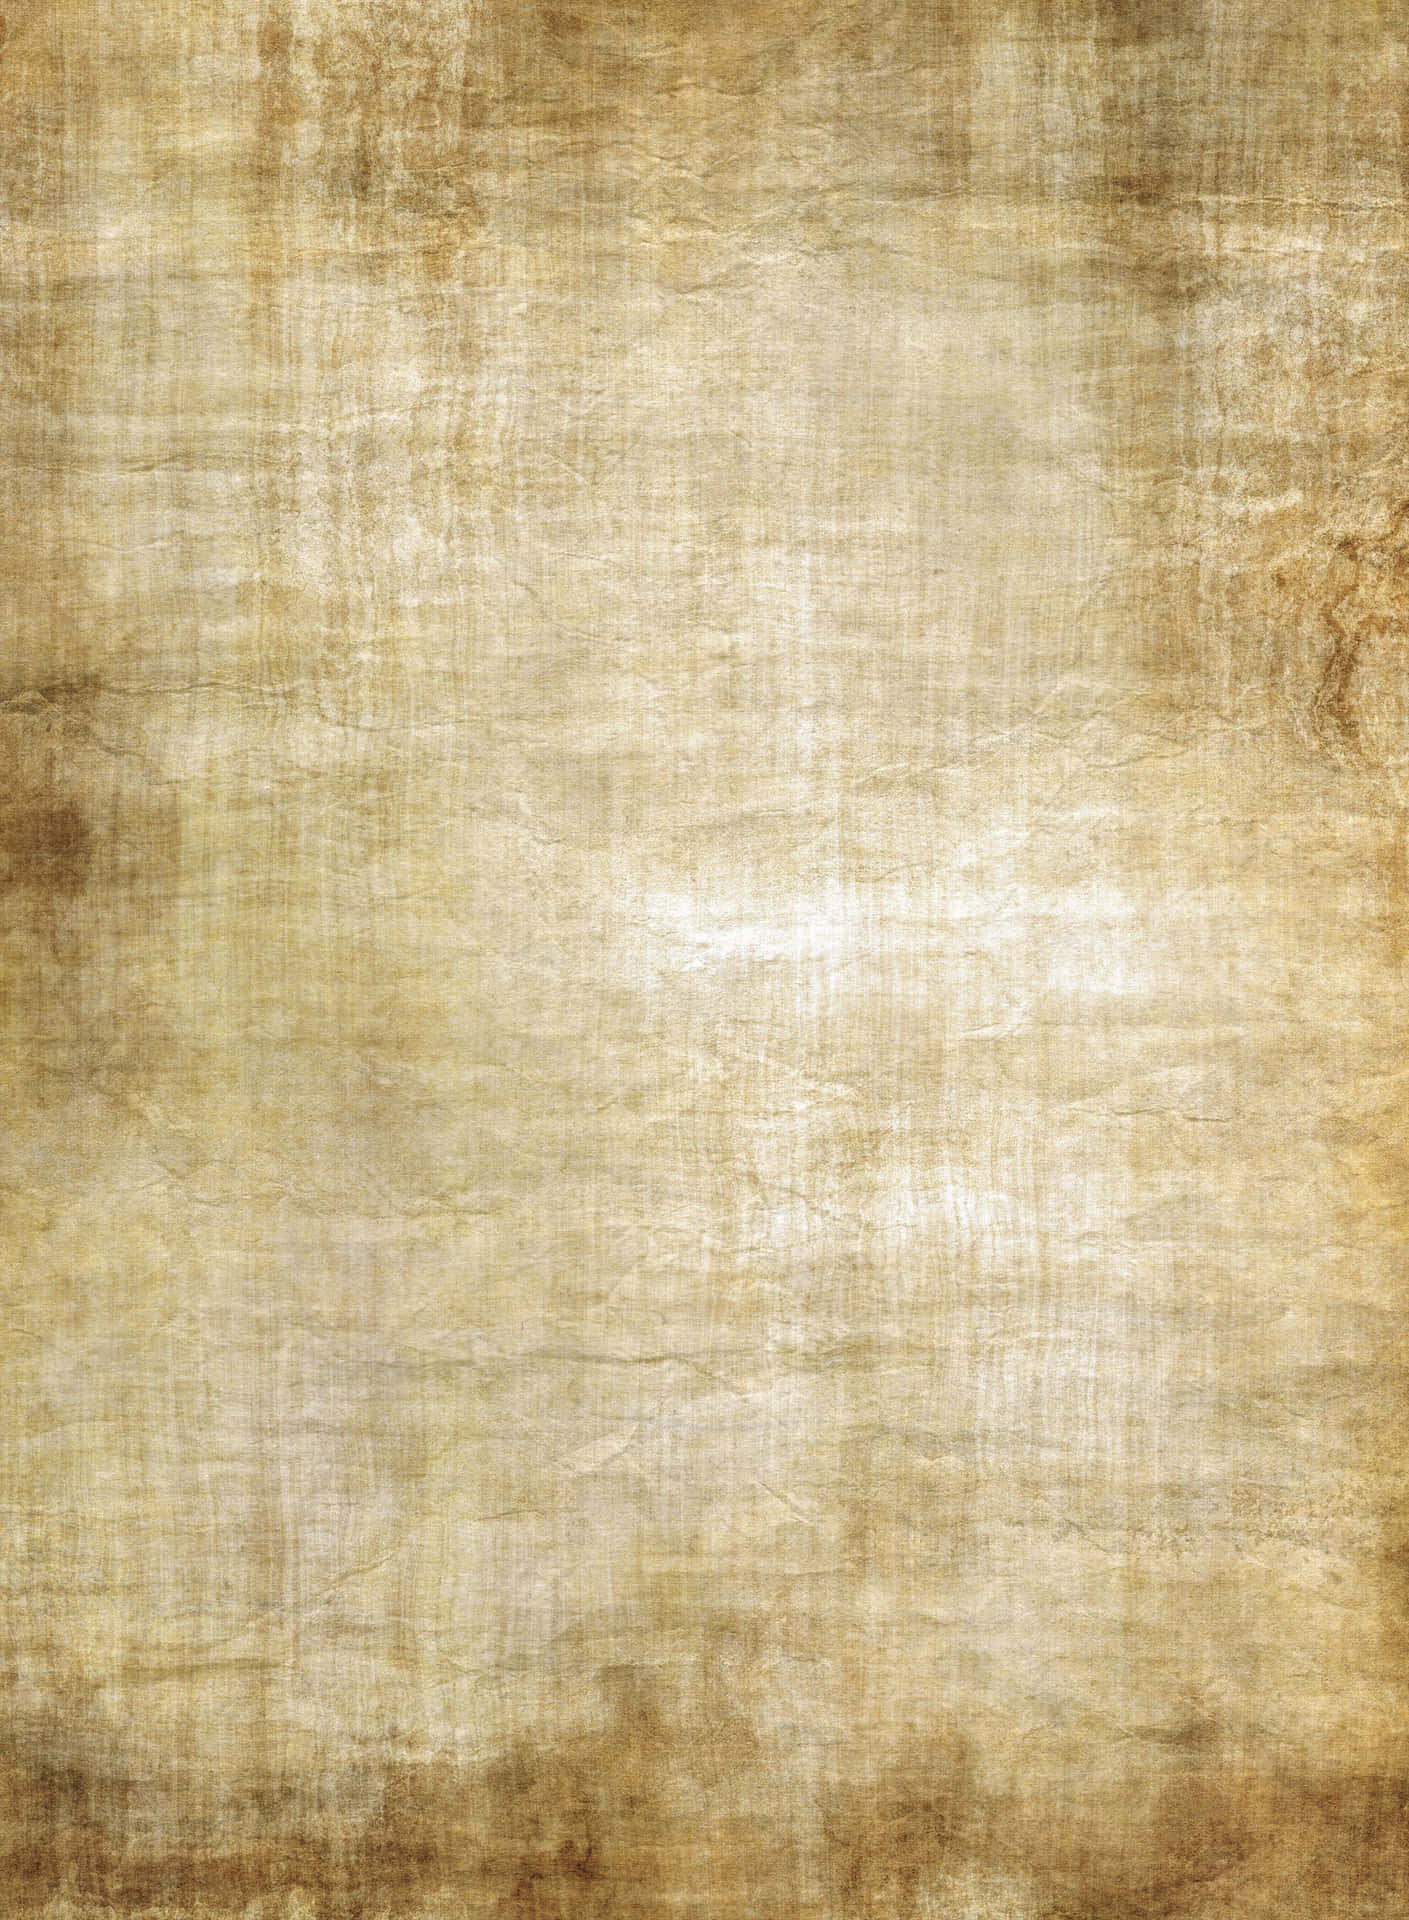 Old Paper Texture Crease Line Background